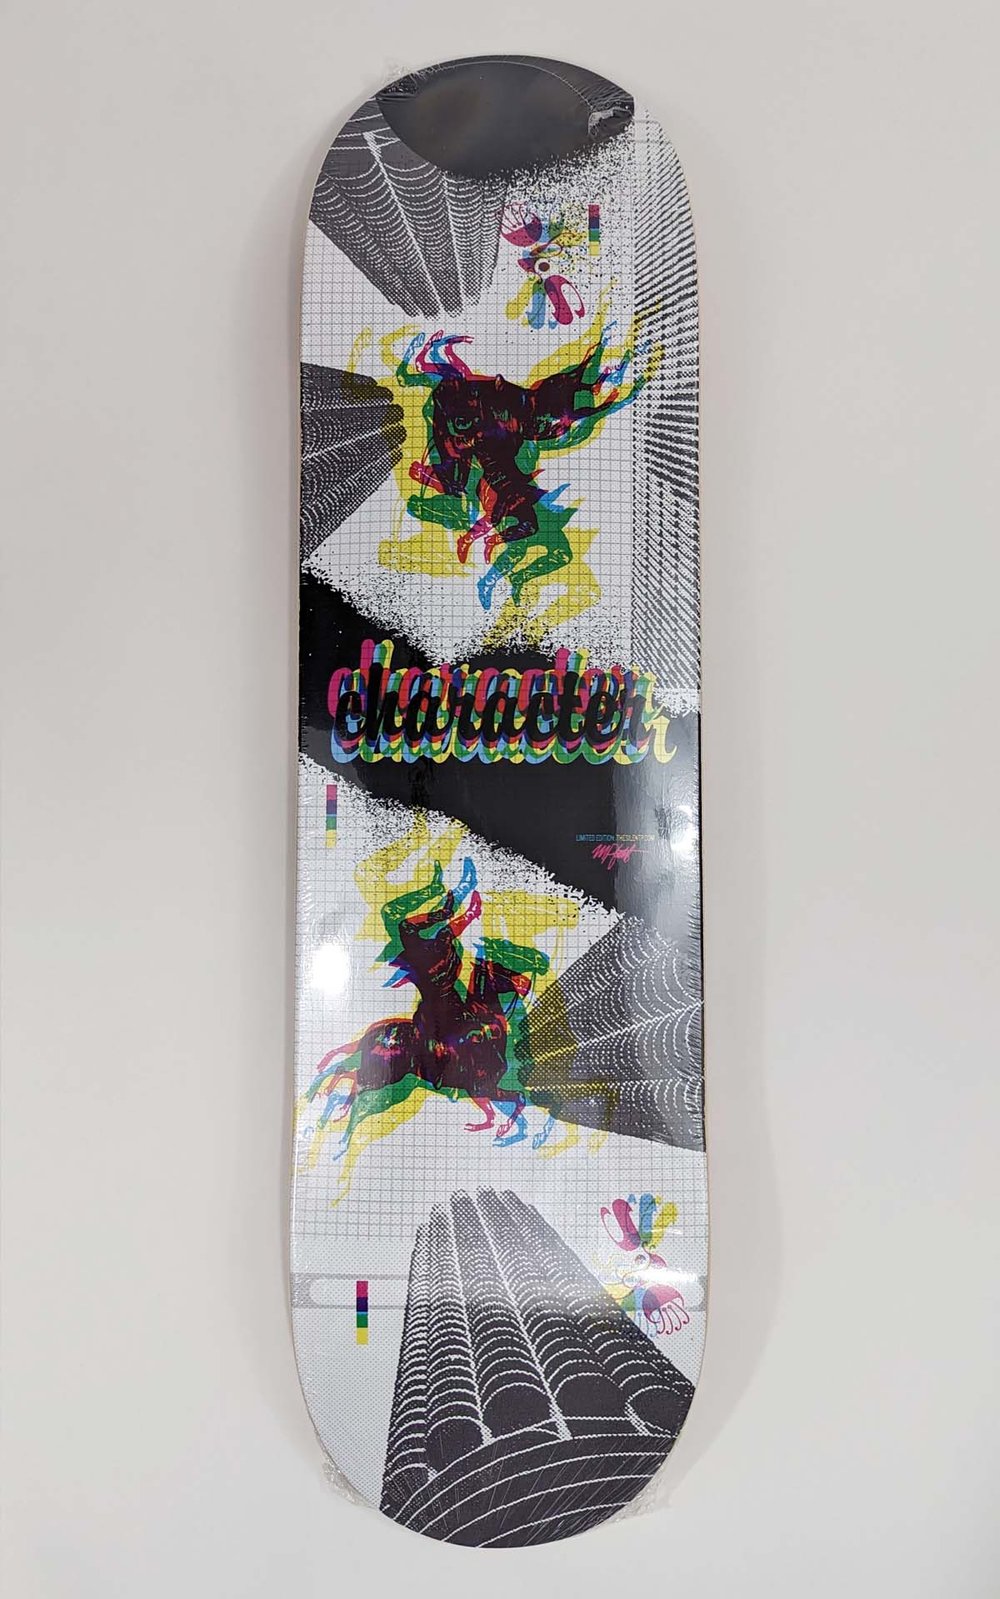 "Kicking Towers" Limted Edition Skate Deck